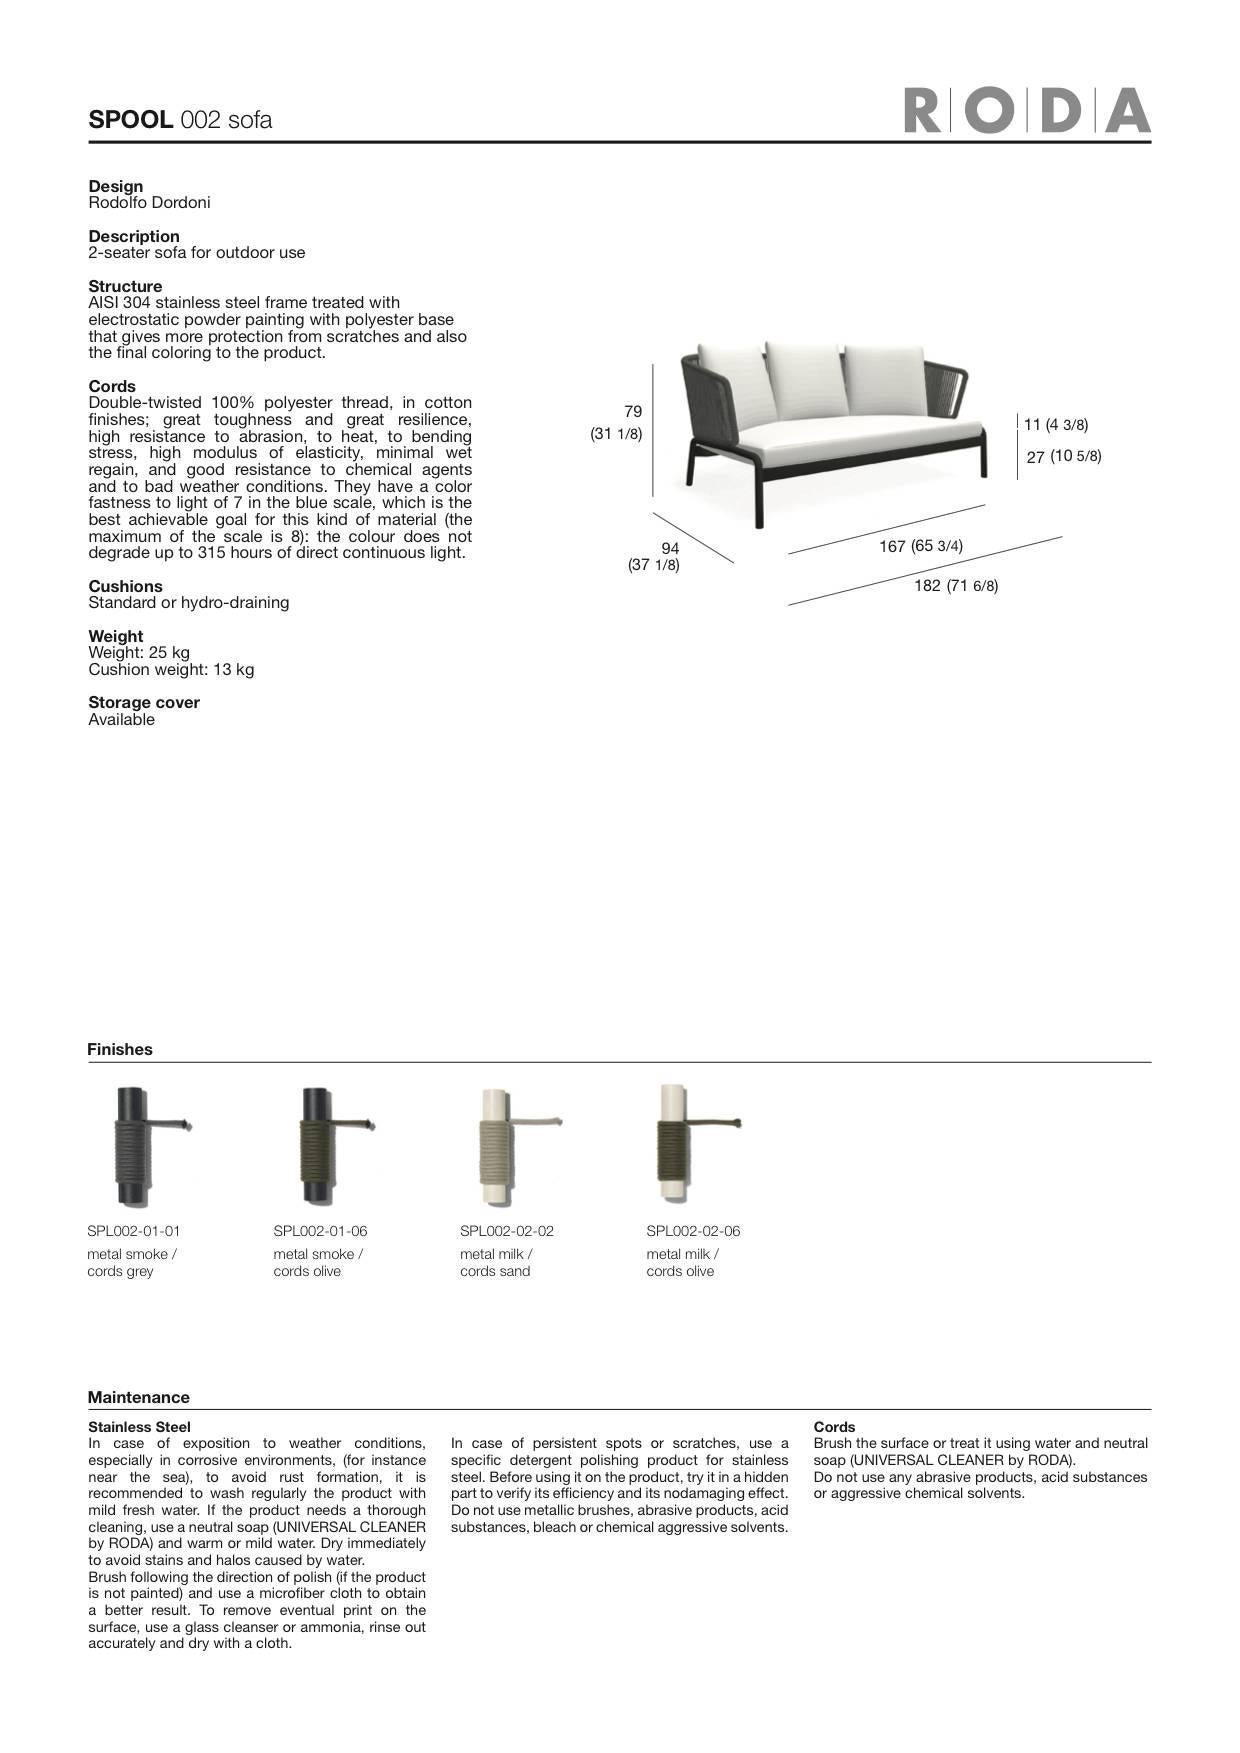 Powder-Coated Roda Spool Two-Seat Sofa for Outdoor/Indoor Use by Rodolfo Dordoni For Sale